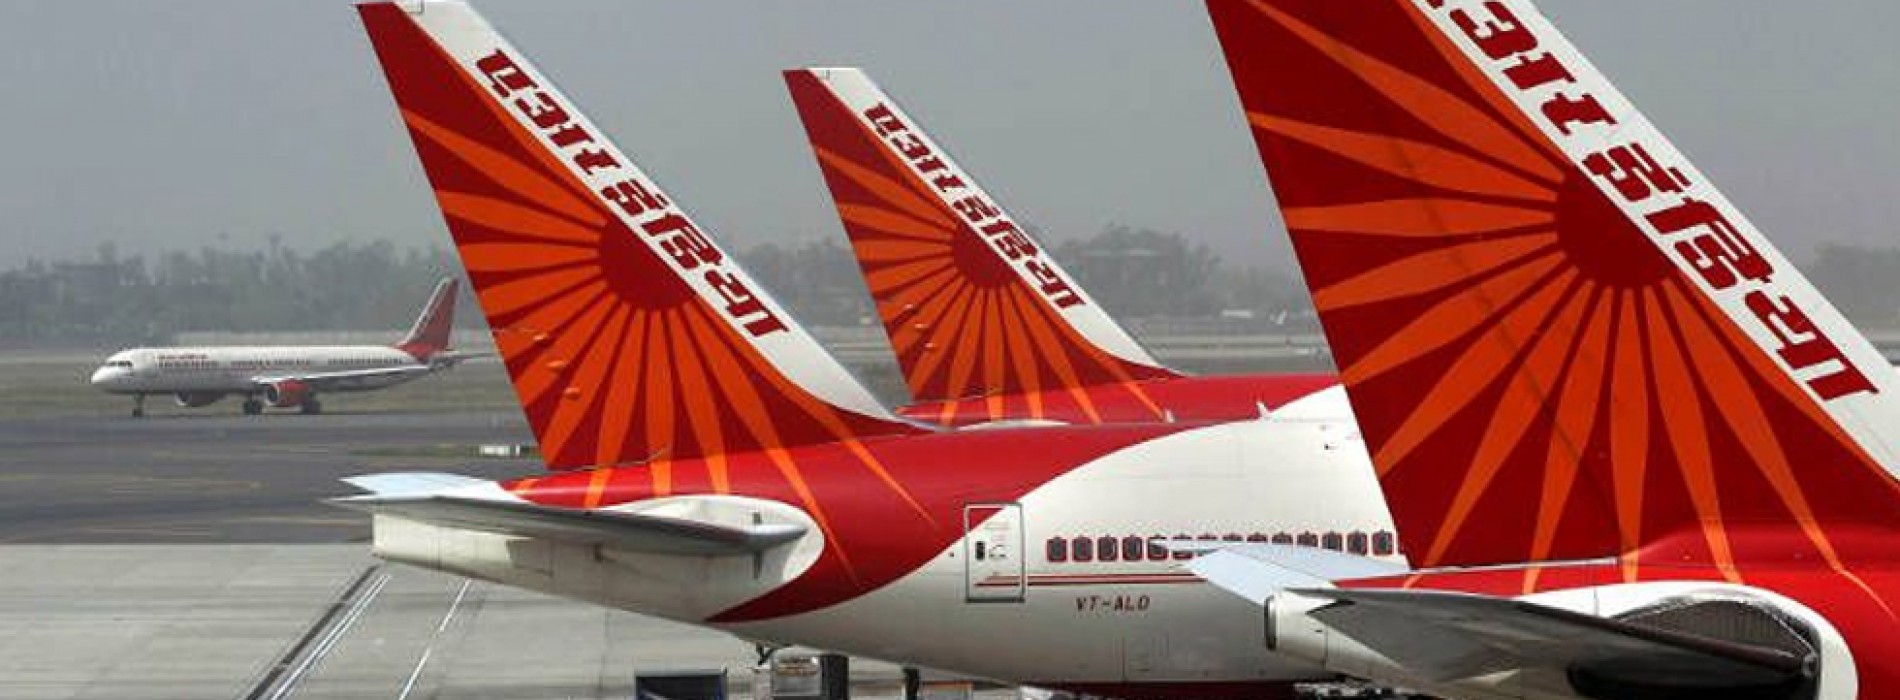 Govt to appoint transaction advisers for Air India disinvestment